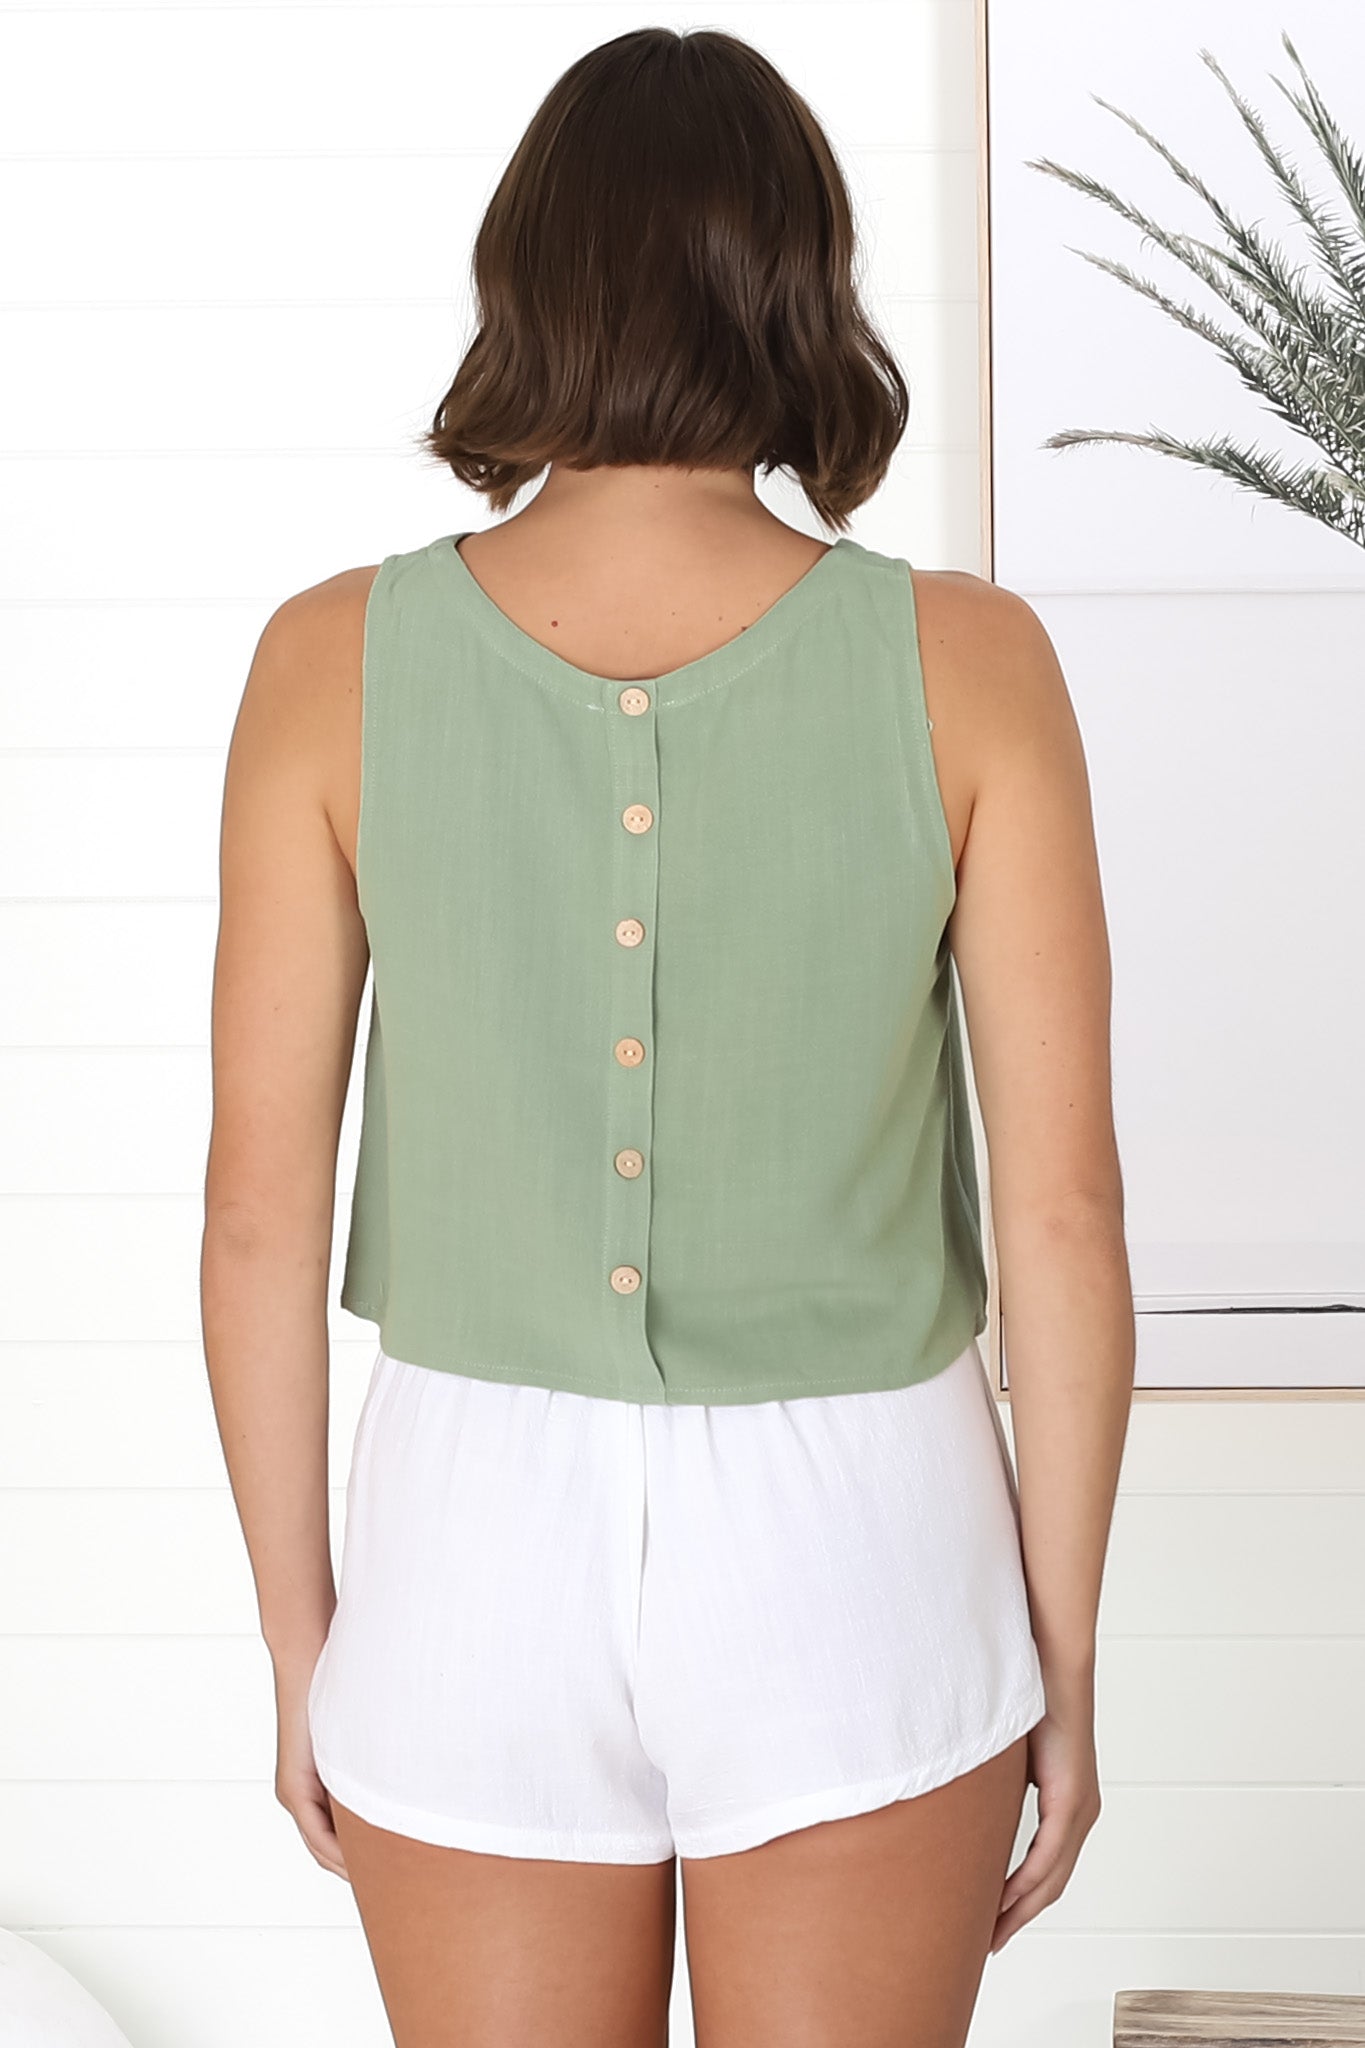 Kaydee Top - Boxy Sleeveless Top with Button Down Spine in Khaki